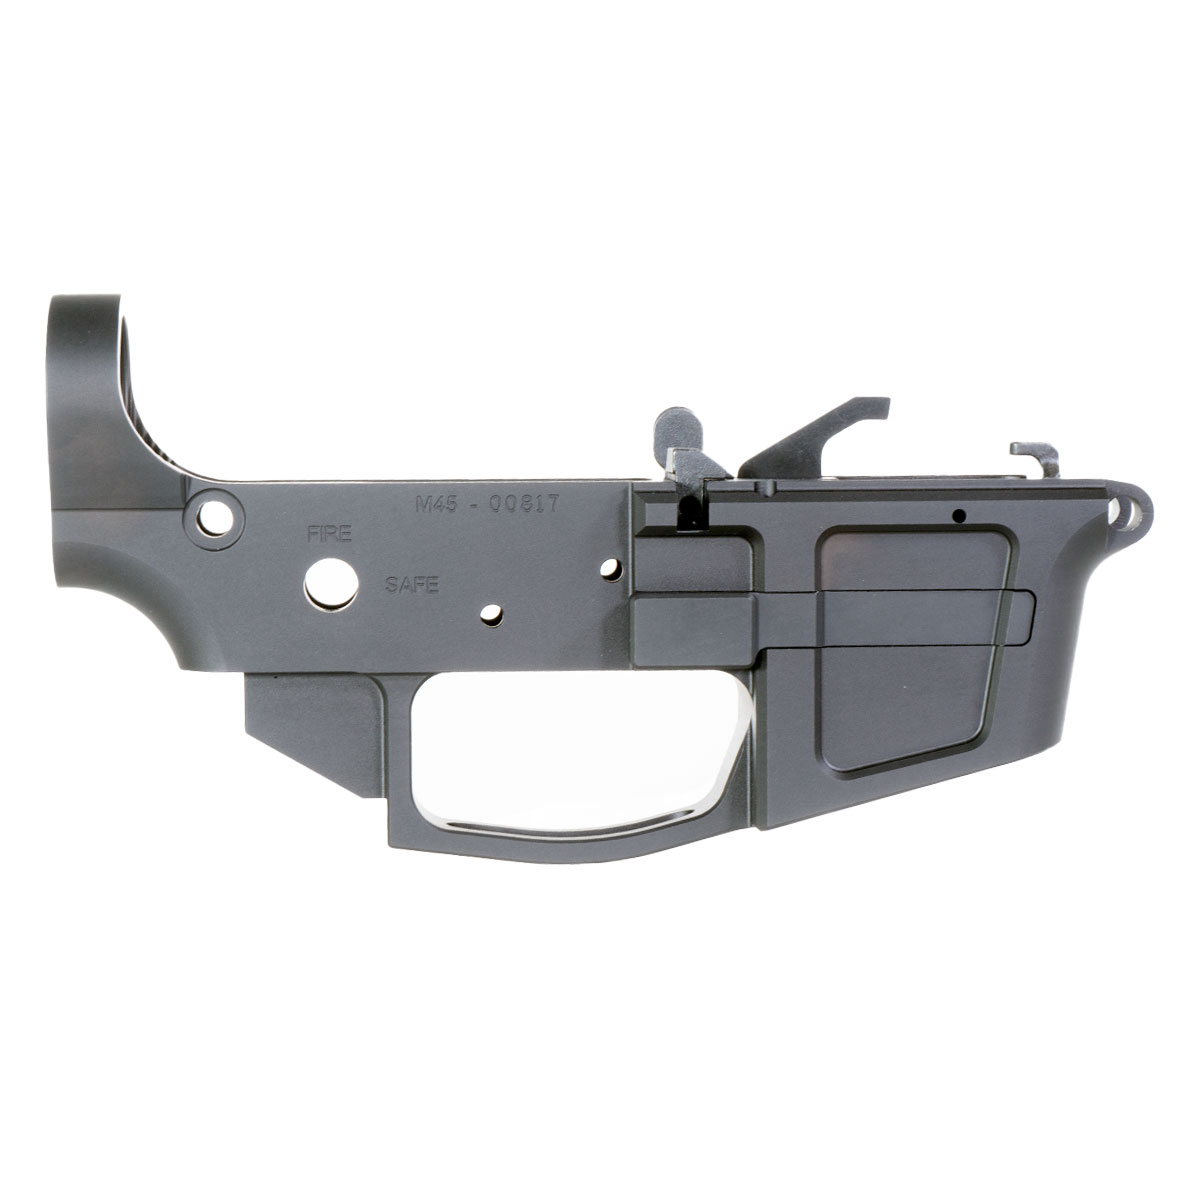 Foxtrot Mike FM-45 Billet Stripped Lower Receiver w/ LRBHO Compatible with Glock .45 Magazine